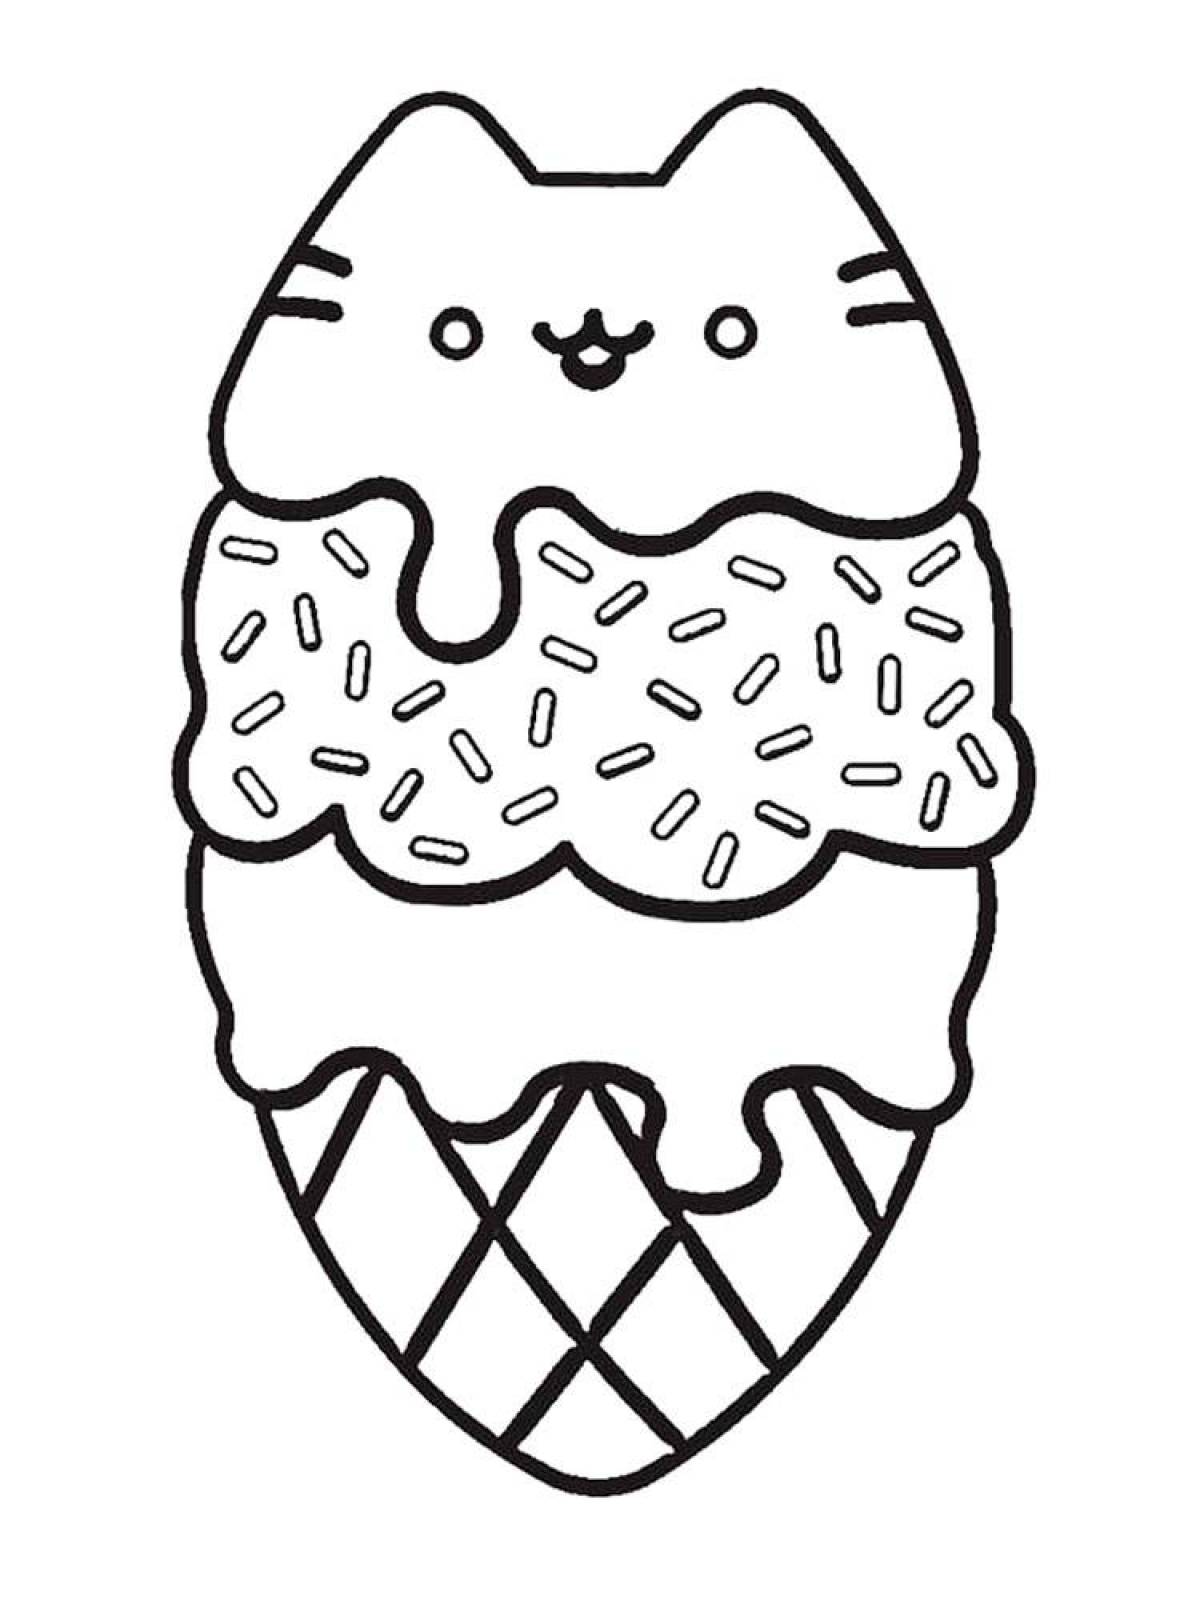 Pusheen Multicolored Adventure Coloring Page